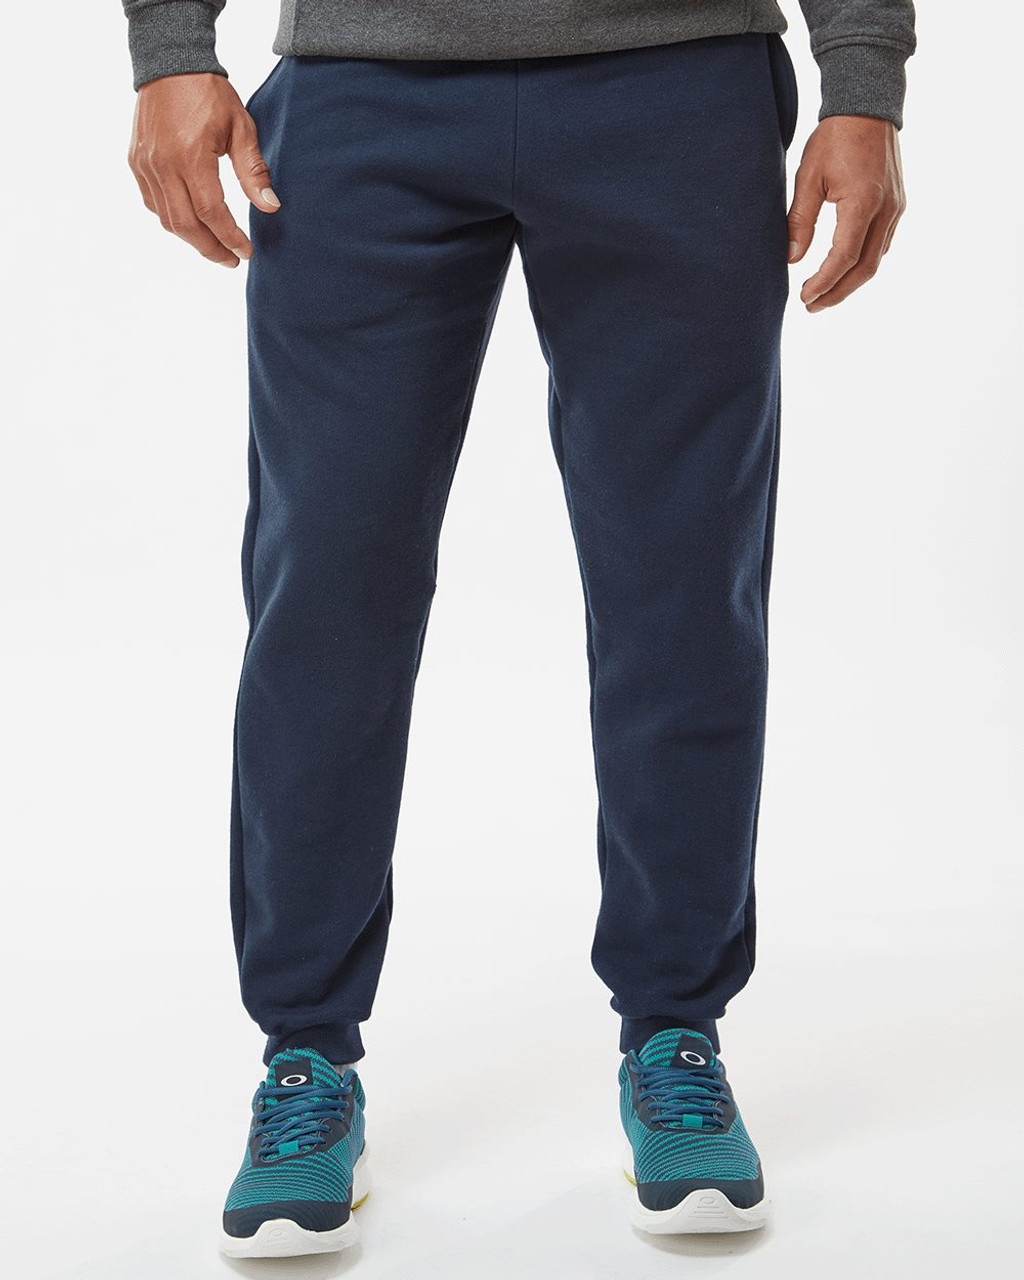 Embroidered Sport Athletic Fleece Joggers - 1215